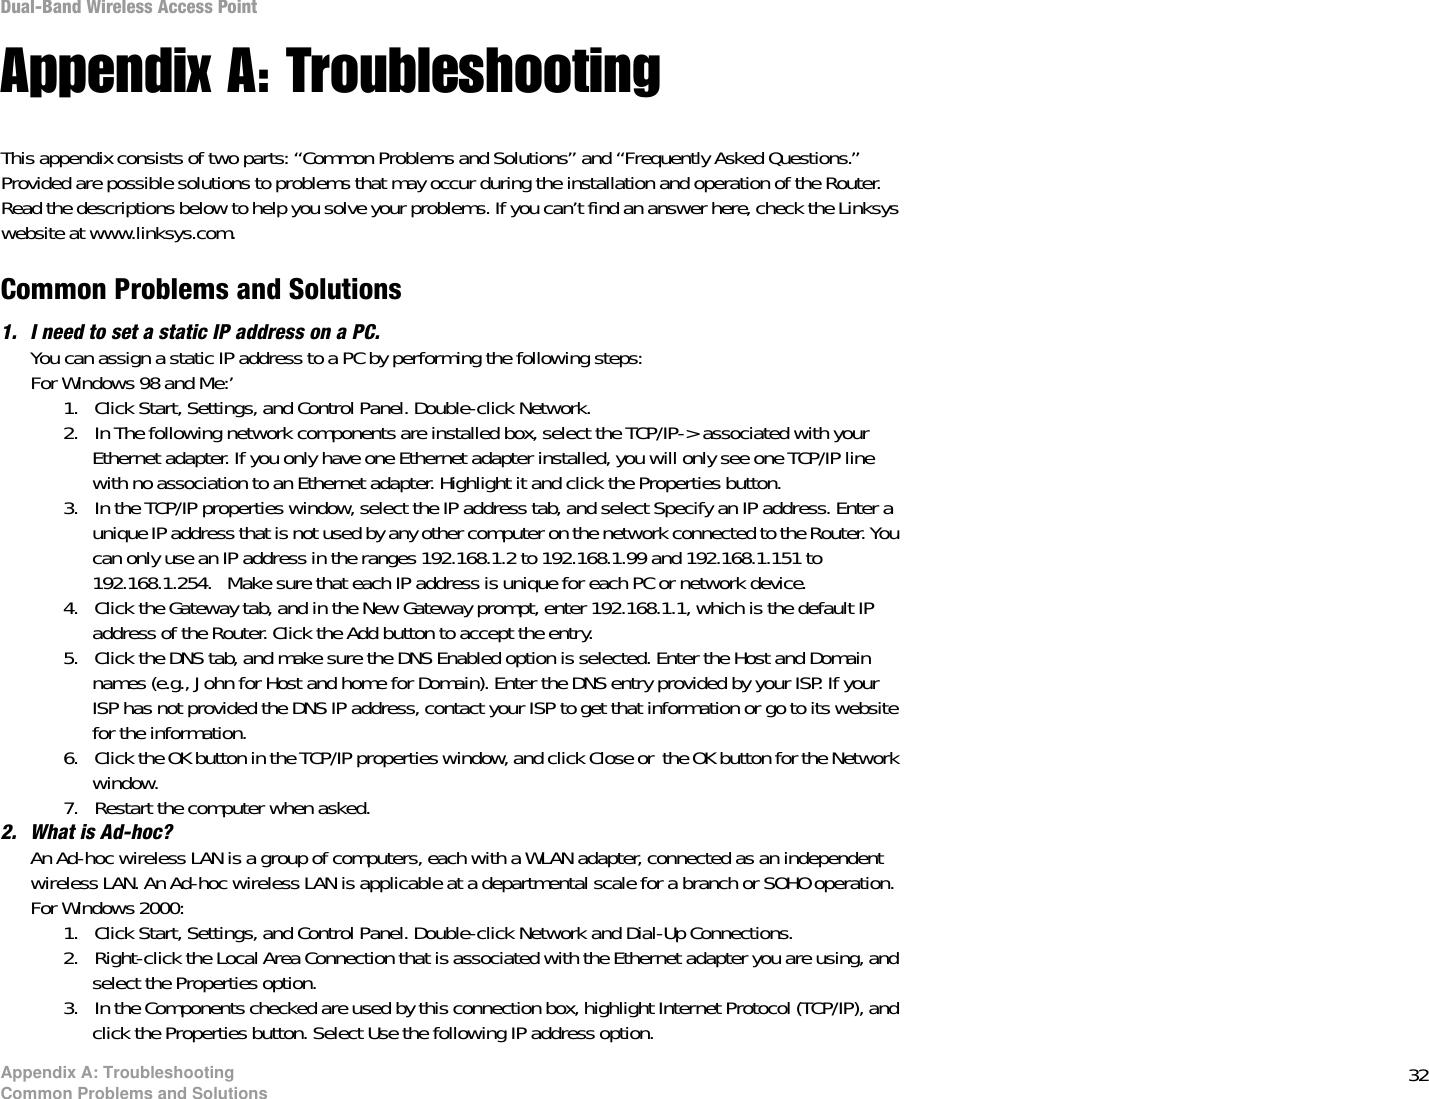 32Appendix A: TroubleshootingCommon Problems and SolutionsDual-Band Wireless Access PointAppendix A: TroubleshootingThis appendix consists of two parts: “Common Problems and Solutions” and “Frequently Asked Questions.” Provided are possible solutions to problems that may occur during the installation and operation of the Router. Read the descriptions below to help you solve your problems. If you can’t find an answer here, check the Linksys website at www.linksys.com.Common Problems and Solutions1. I need to set a static IP address on a PC.You can assign a static IP address to a PC by performing the following steps:For Windows 98 and Me:’1. Click Start, Settings, and Control Panel. Double-click Network.2. In The following network components are installed box, select the TCP/IP-&gt; associated with your Ethernet adapter. If you only have one Ethernet adapter installed, you will only see one TCP/IP line with no association to an Ethernet adapter. Highlight it and click the Properties button.3. In the TCP/IP properties window, select the IP address tab, and select Specify an IP address. Enter a unique IP address that is not used by any other computer on the network connected to the Router. You can only use an IP address in the ranges 192.168.1.2 to 192.168.1.99 and 192.168.1.151 to 192.168.1.254.   Make sure that each IP address is unique for each PC or network device.4. Click the Gateway tab, and in the New Gateway prompt, enter 192.168.1.1, which is the default IP address of the Router. Click the Add button to accept the entry.5. Click the DNS tab, and make sure the DNS Enabled option is selected. Enter the Host and Domain names (e.g., John for Host and home for Domain). Enter the DNS entry provided by your ISP. If your ISP has not provided the DNS IP address, contact your ISP to get that information or go to its website for the information.6. Click the OK button in the TCP/IP properties window, and click Close or  the OK button for the Network window.7. Restart the computer when asked.2. What is Ad-hoc?An Ad-hoc wireless LAN is a group of computers, each with a WLAN adapter, connected as an independent wireless LAN. An Ad-hoc wireless LAN is applicable at a departmental scale for a branch or SOHO operation.For Windows 2000:1. Click Start, Settings, and Control Panel. Double-click Network and Dial-Up Connections.2. Right-click the Local Area Connection that is associated with the Ethernet adapter you are using, and select the Properties option.3. In the Components checked are used by this connection box, highlight Internet Protocol (TCP/IP), and click the Properties button. Select Use the following IP address option. 